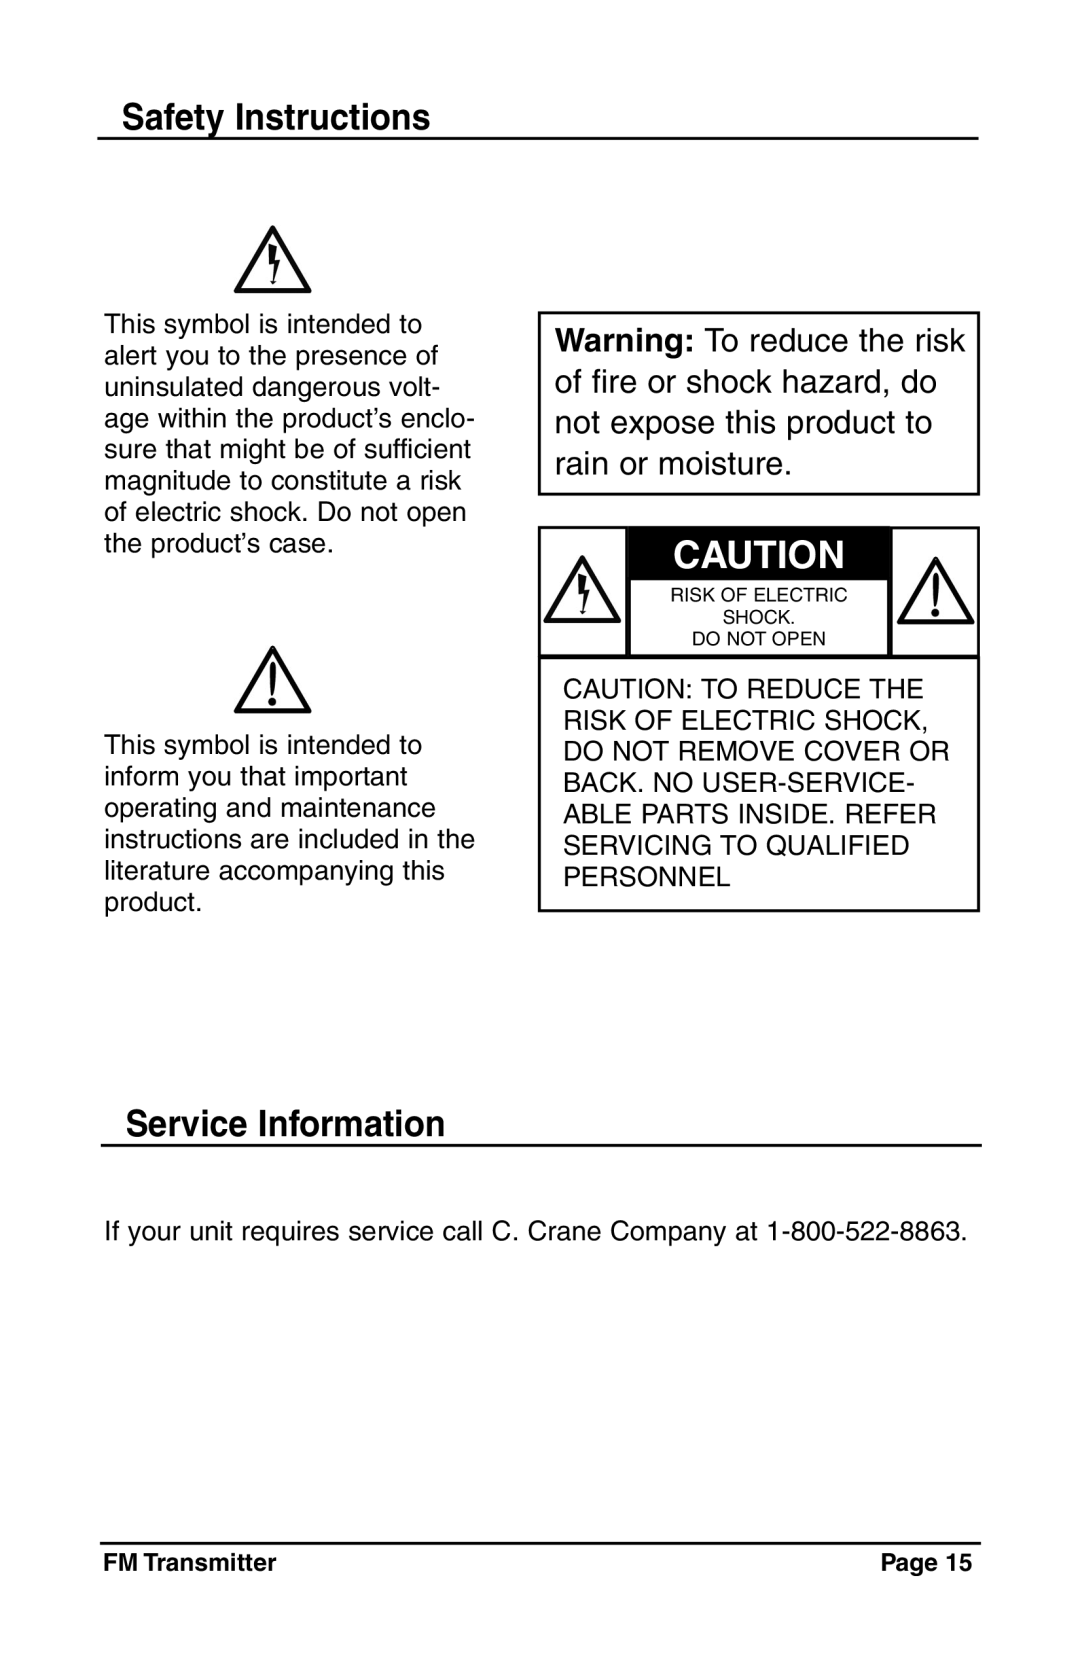 C. Crane Satellite Radio manual Service Information, Safety Instructions, Risk Of Electric Shock Do Not Open 